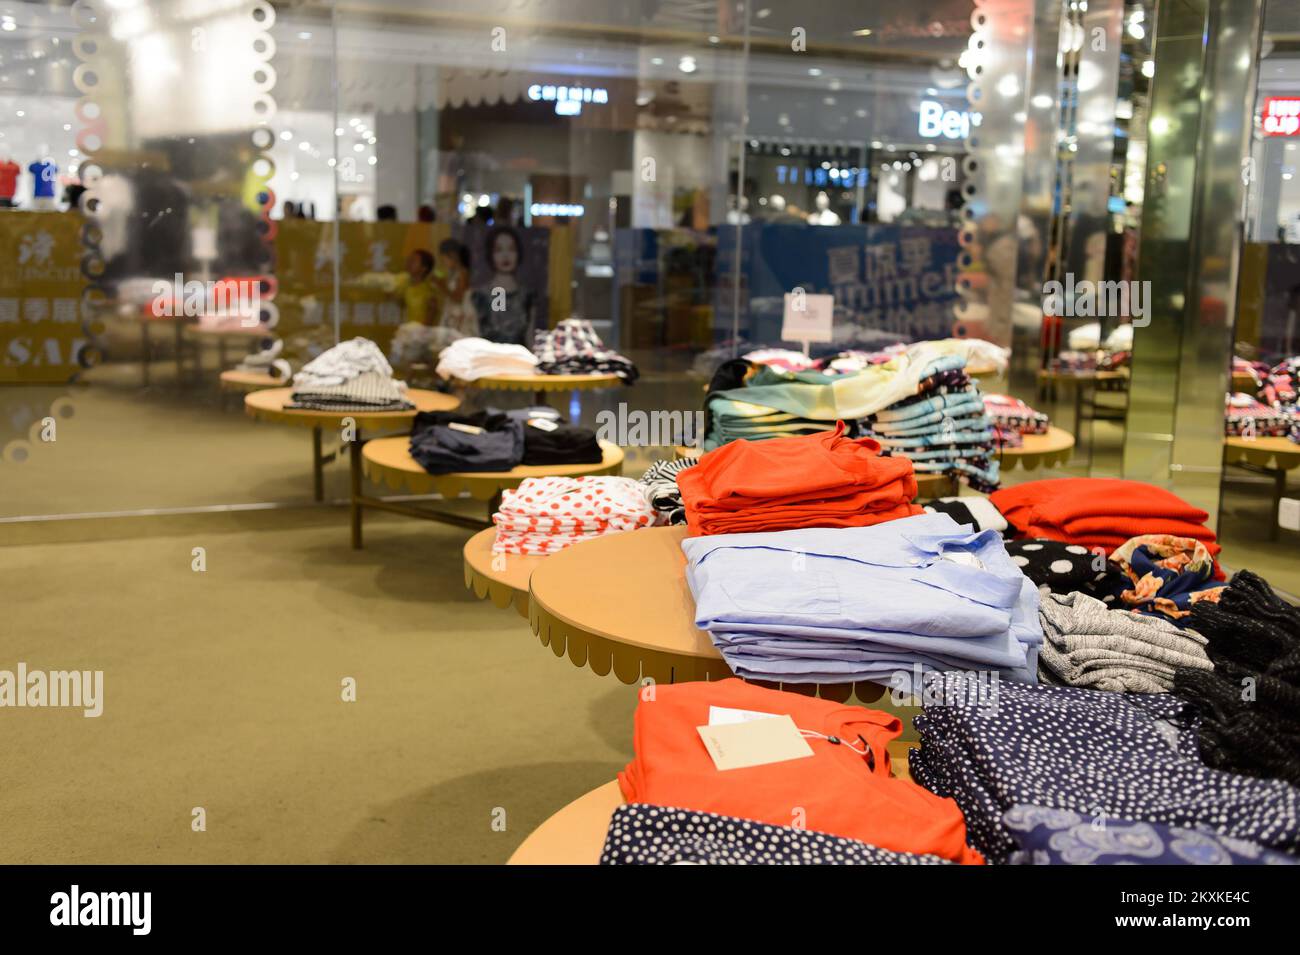 SHENZHEN, CHINA - MAY 17, 2015: shopping center interior. Shenzhen is a major city in the south of Southern China's Guangdong Province, situated immed Stock Photo